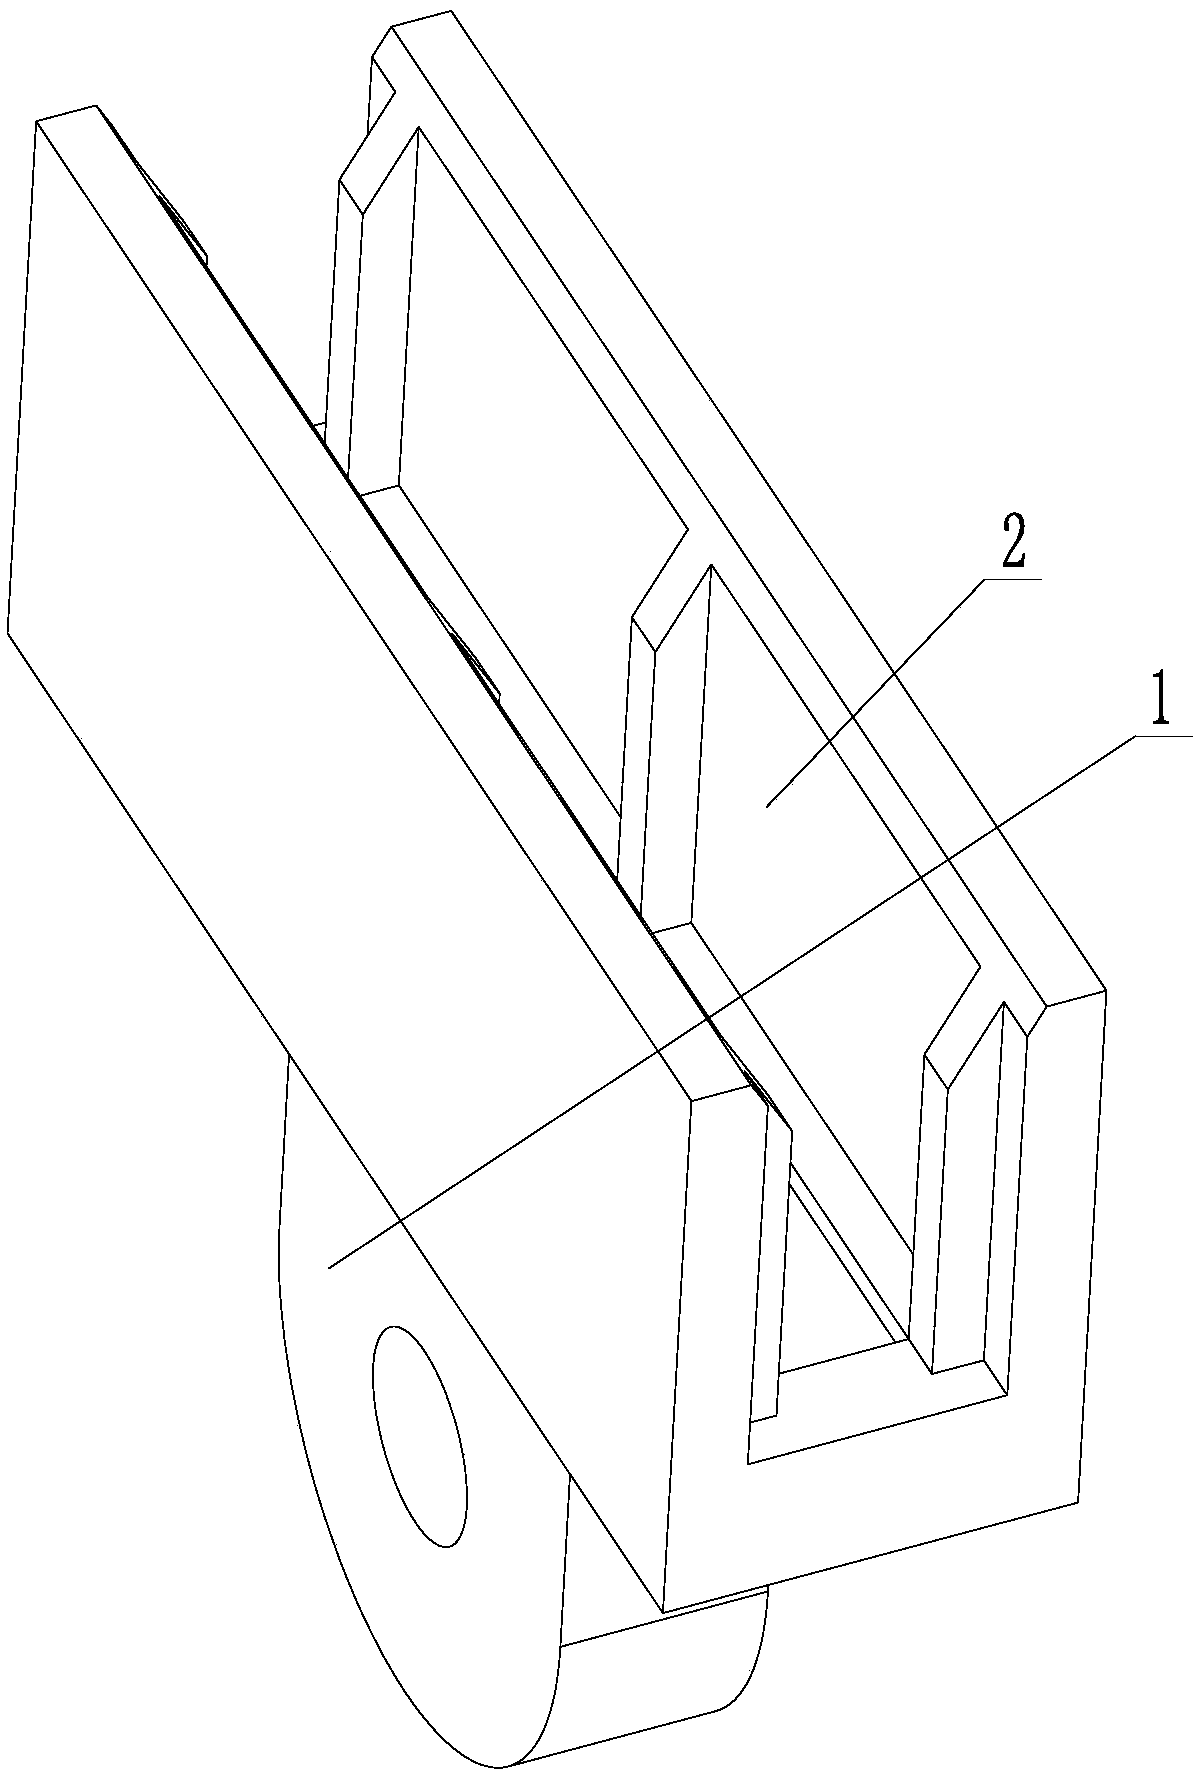 Bracket capable of quickly bonding and curing with window glass